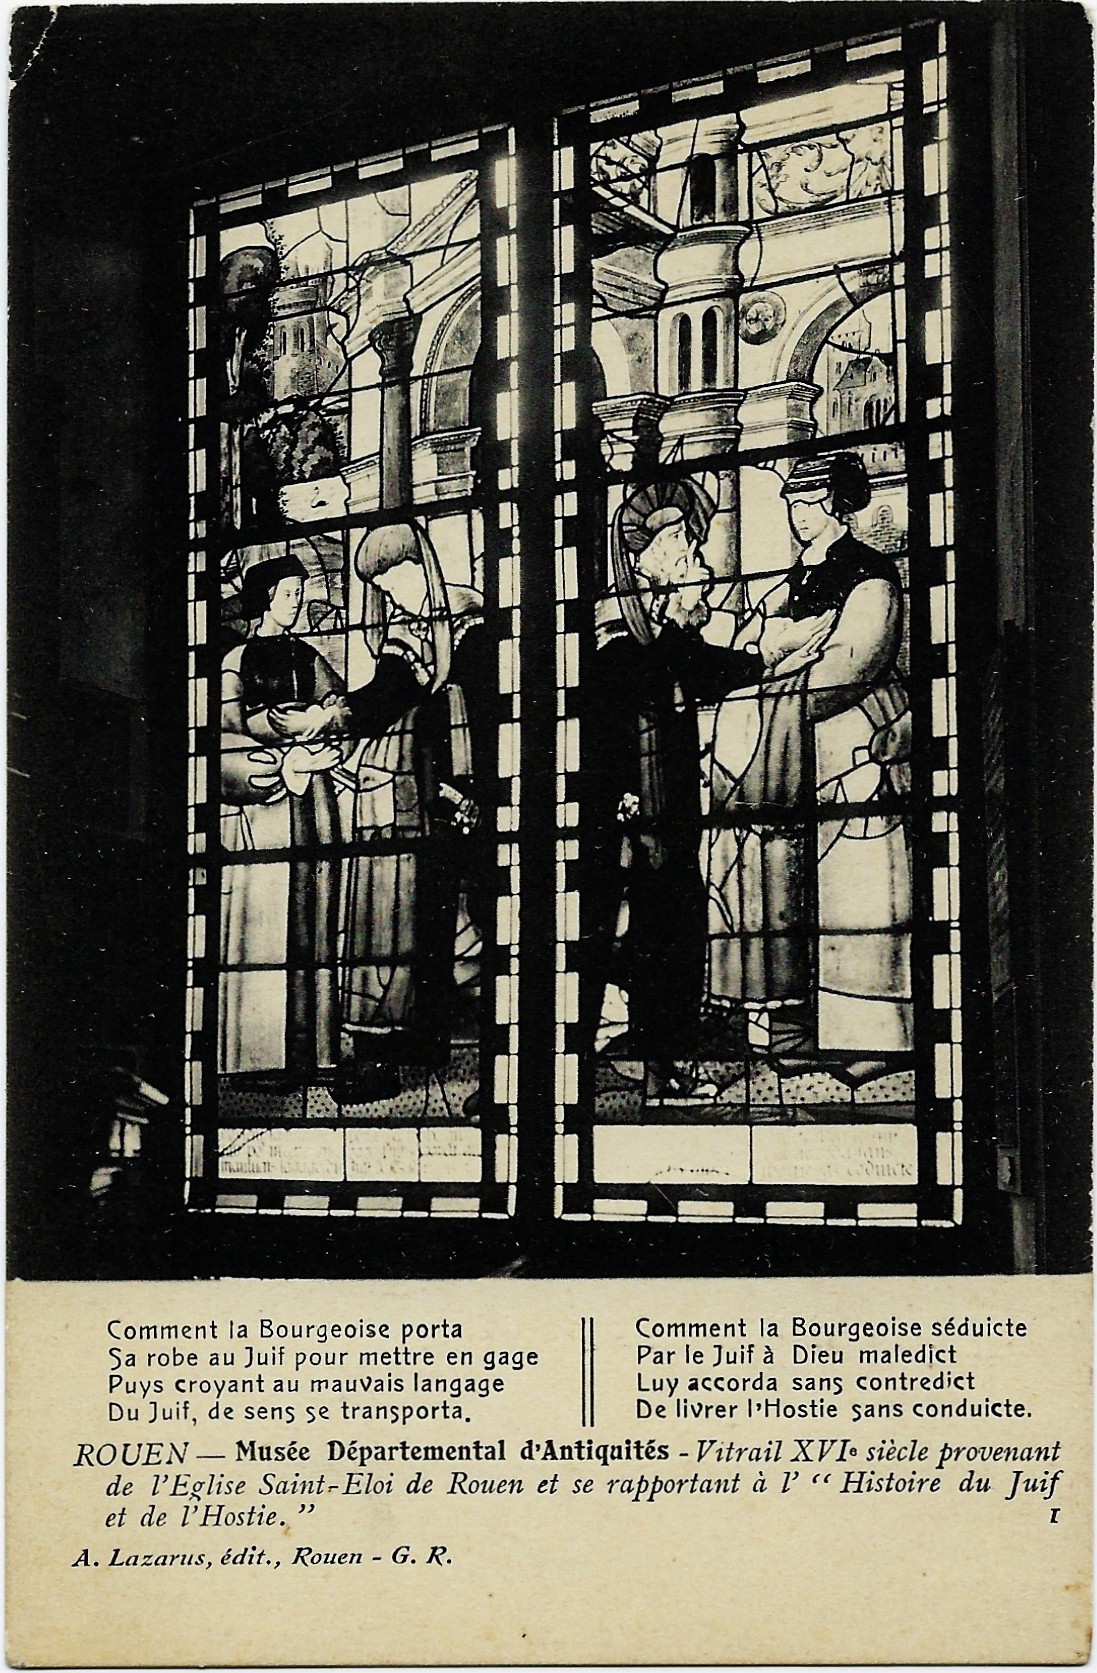 XVI Century Stained Glass Window from the Saint-Eloi Church in R